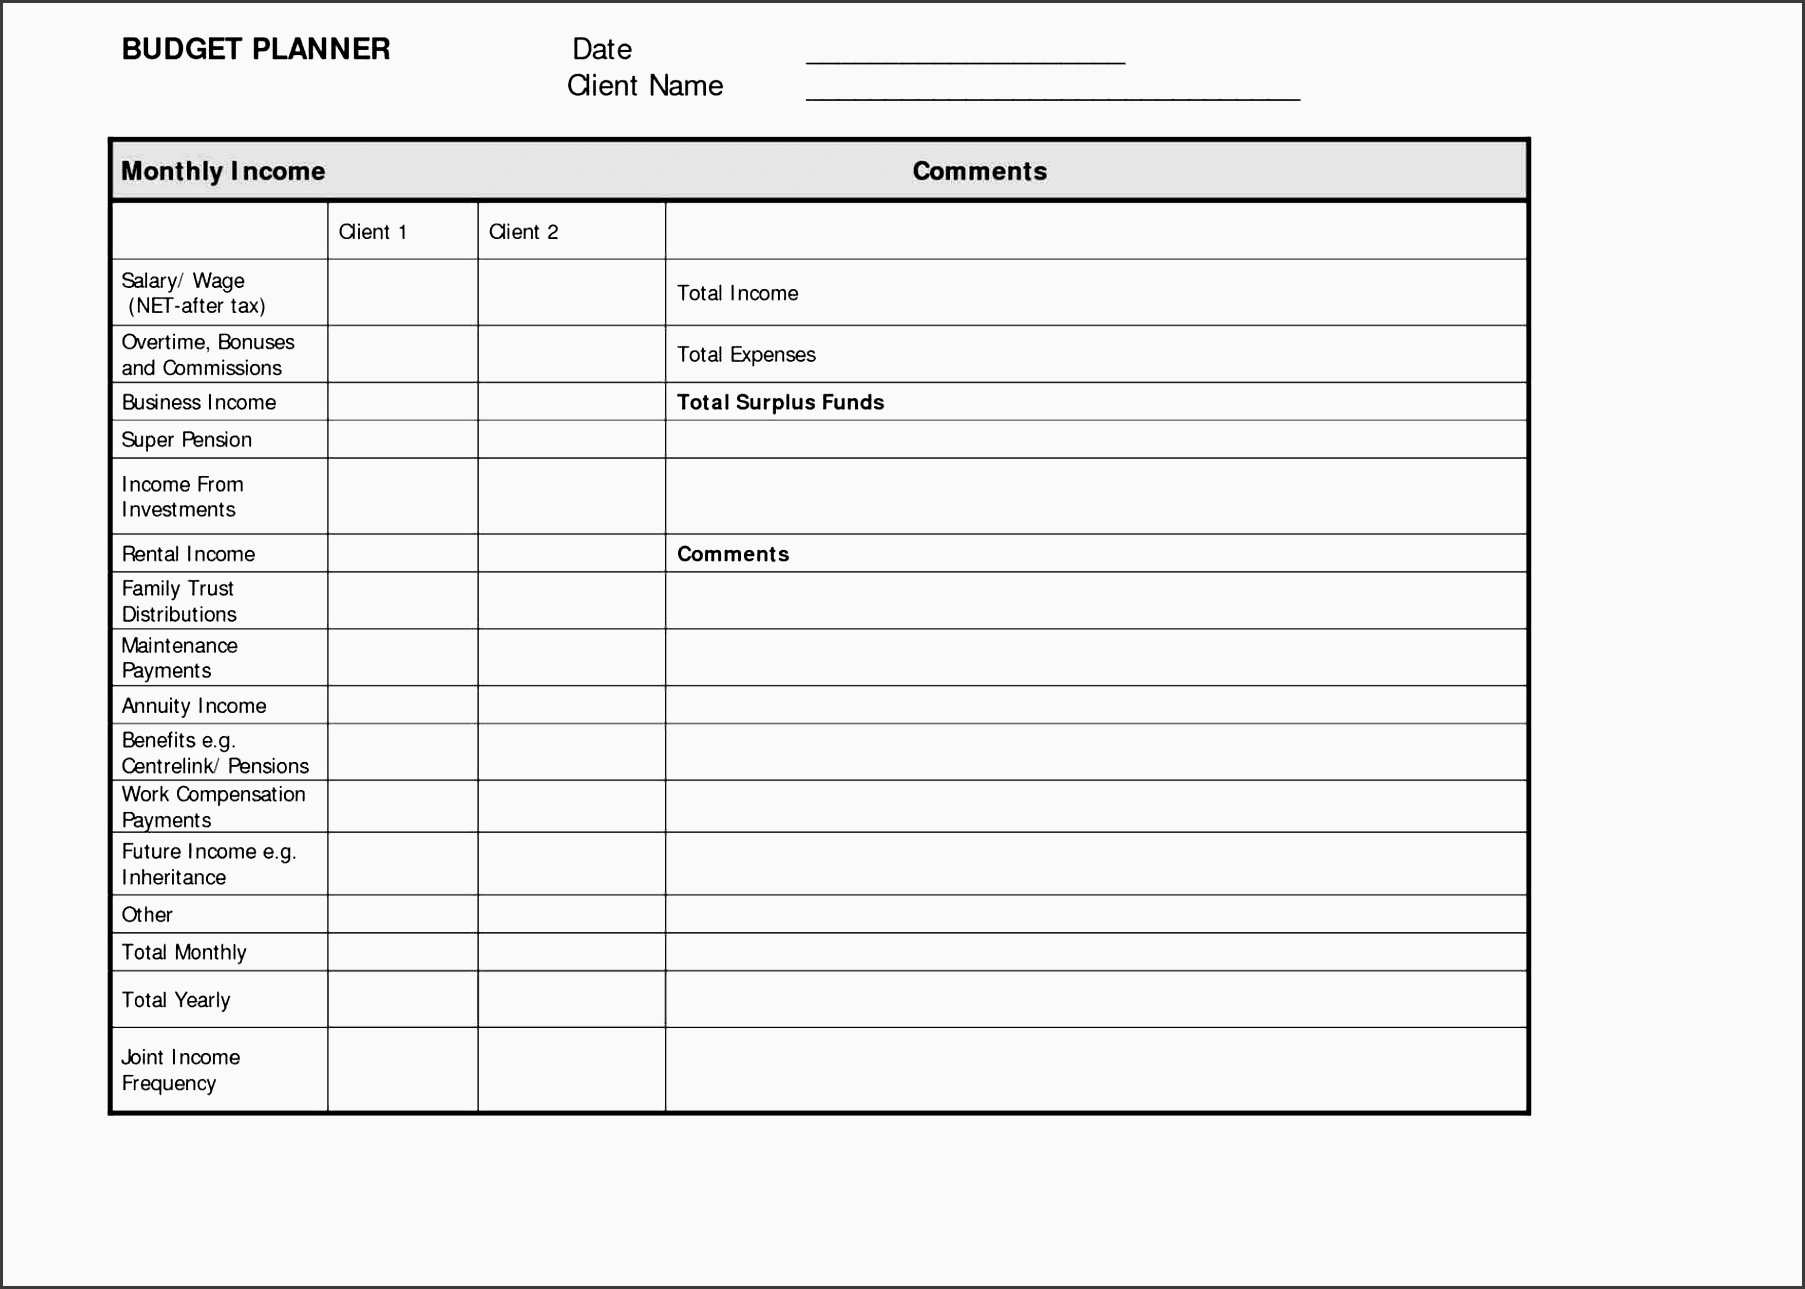 bud bud planning template planning worksheets monthly bills template planner free business bud bud planning template